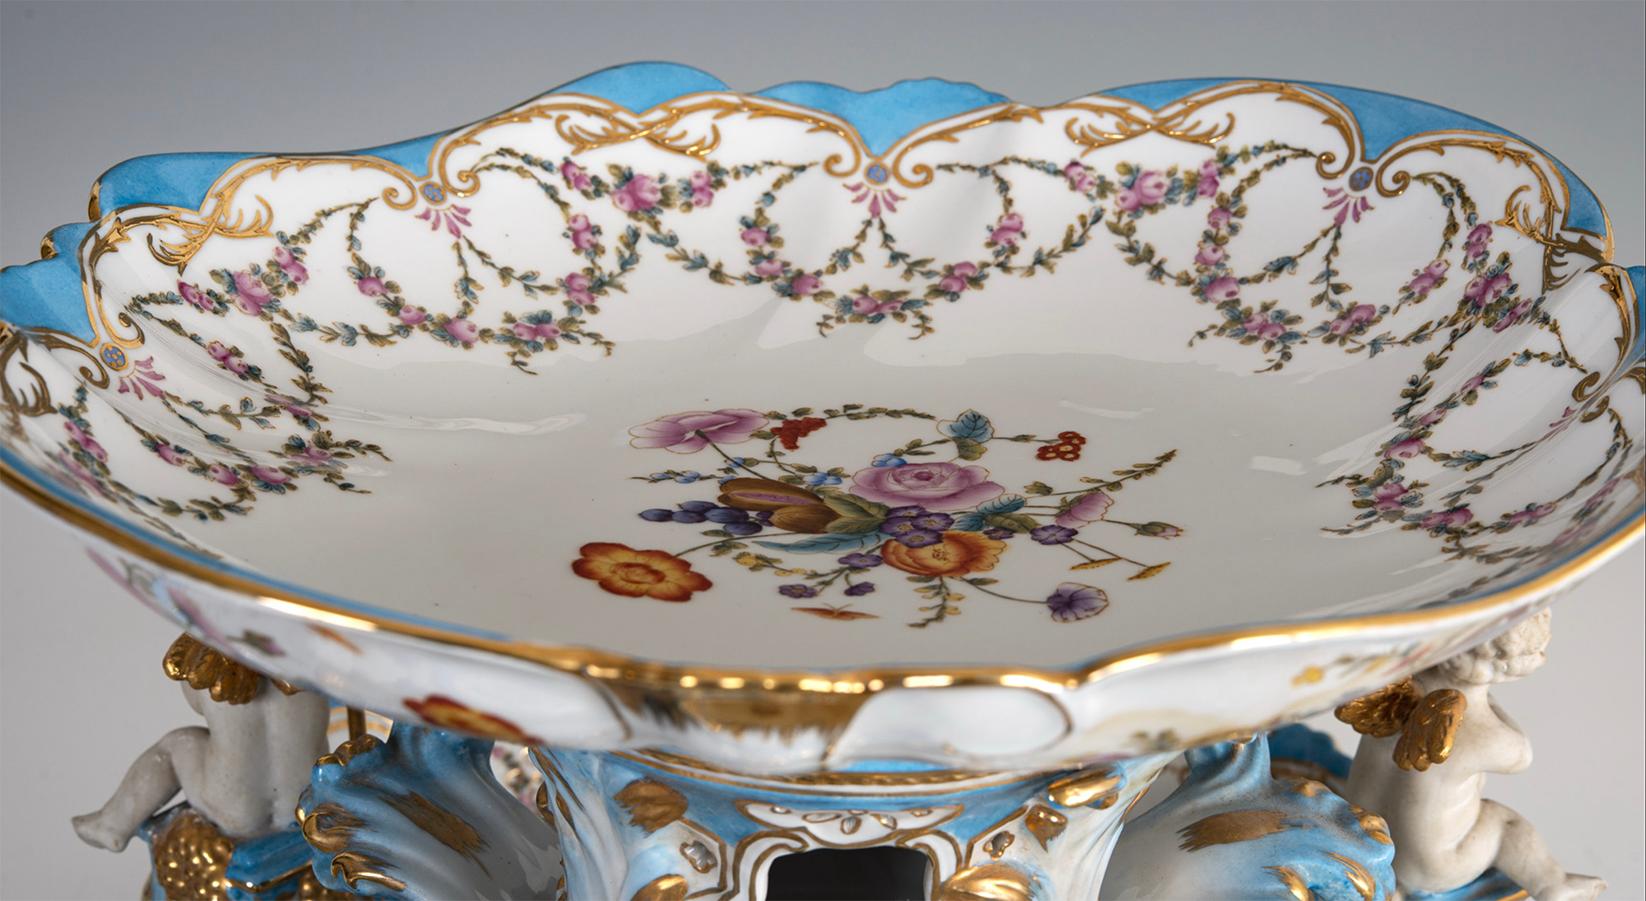 An exemplary performance from the historic French factory. From the private collection of Countess Nikolic.
With indication Sevres
Size: approx. 31 x 64 cm
6 pieces - 4 bowls bottom, 1 bowl top, 1 middle
Beautiful, bright colours
Decorated with